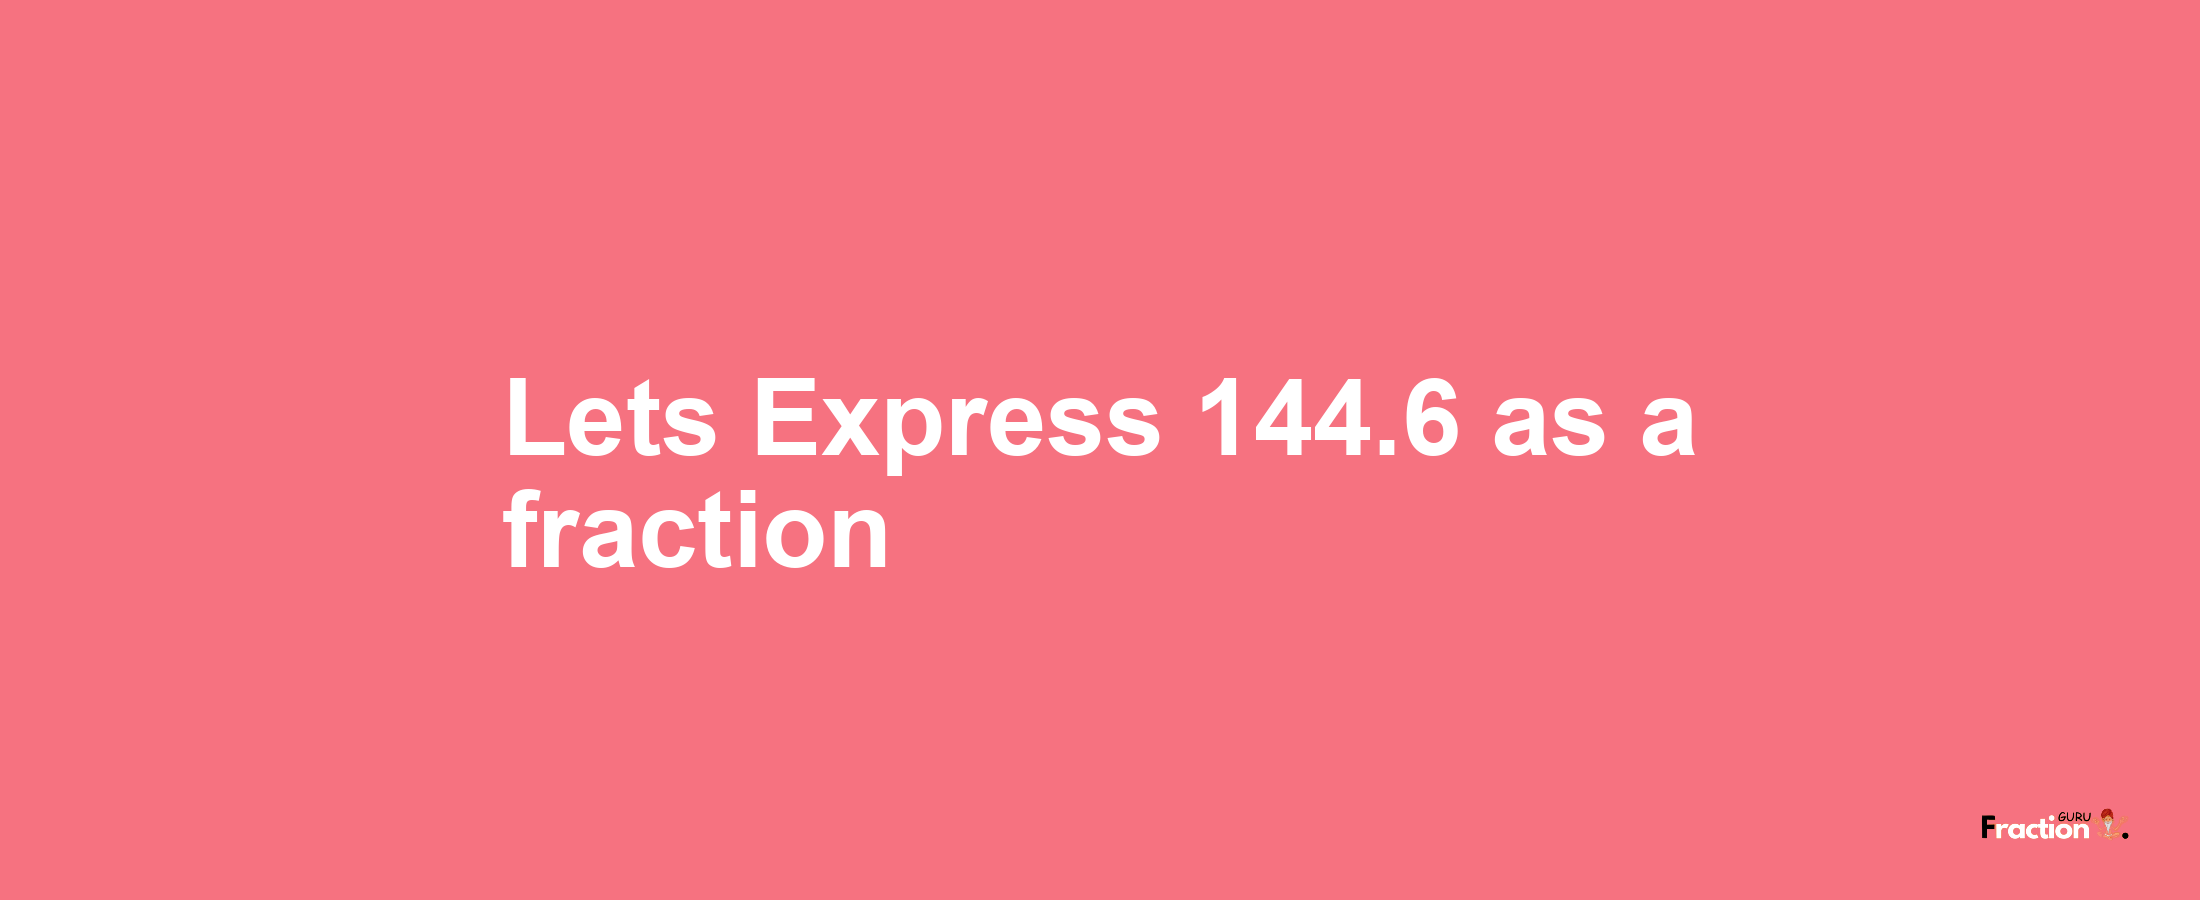 Lets Express 144.6 as afraction